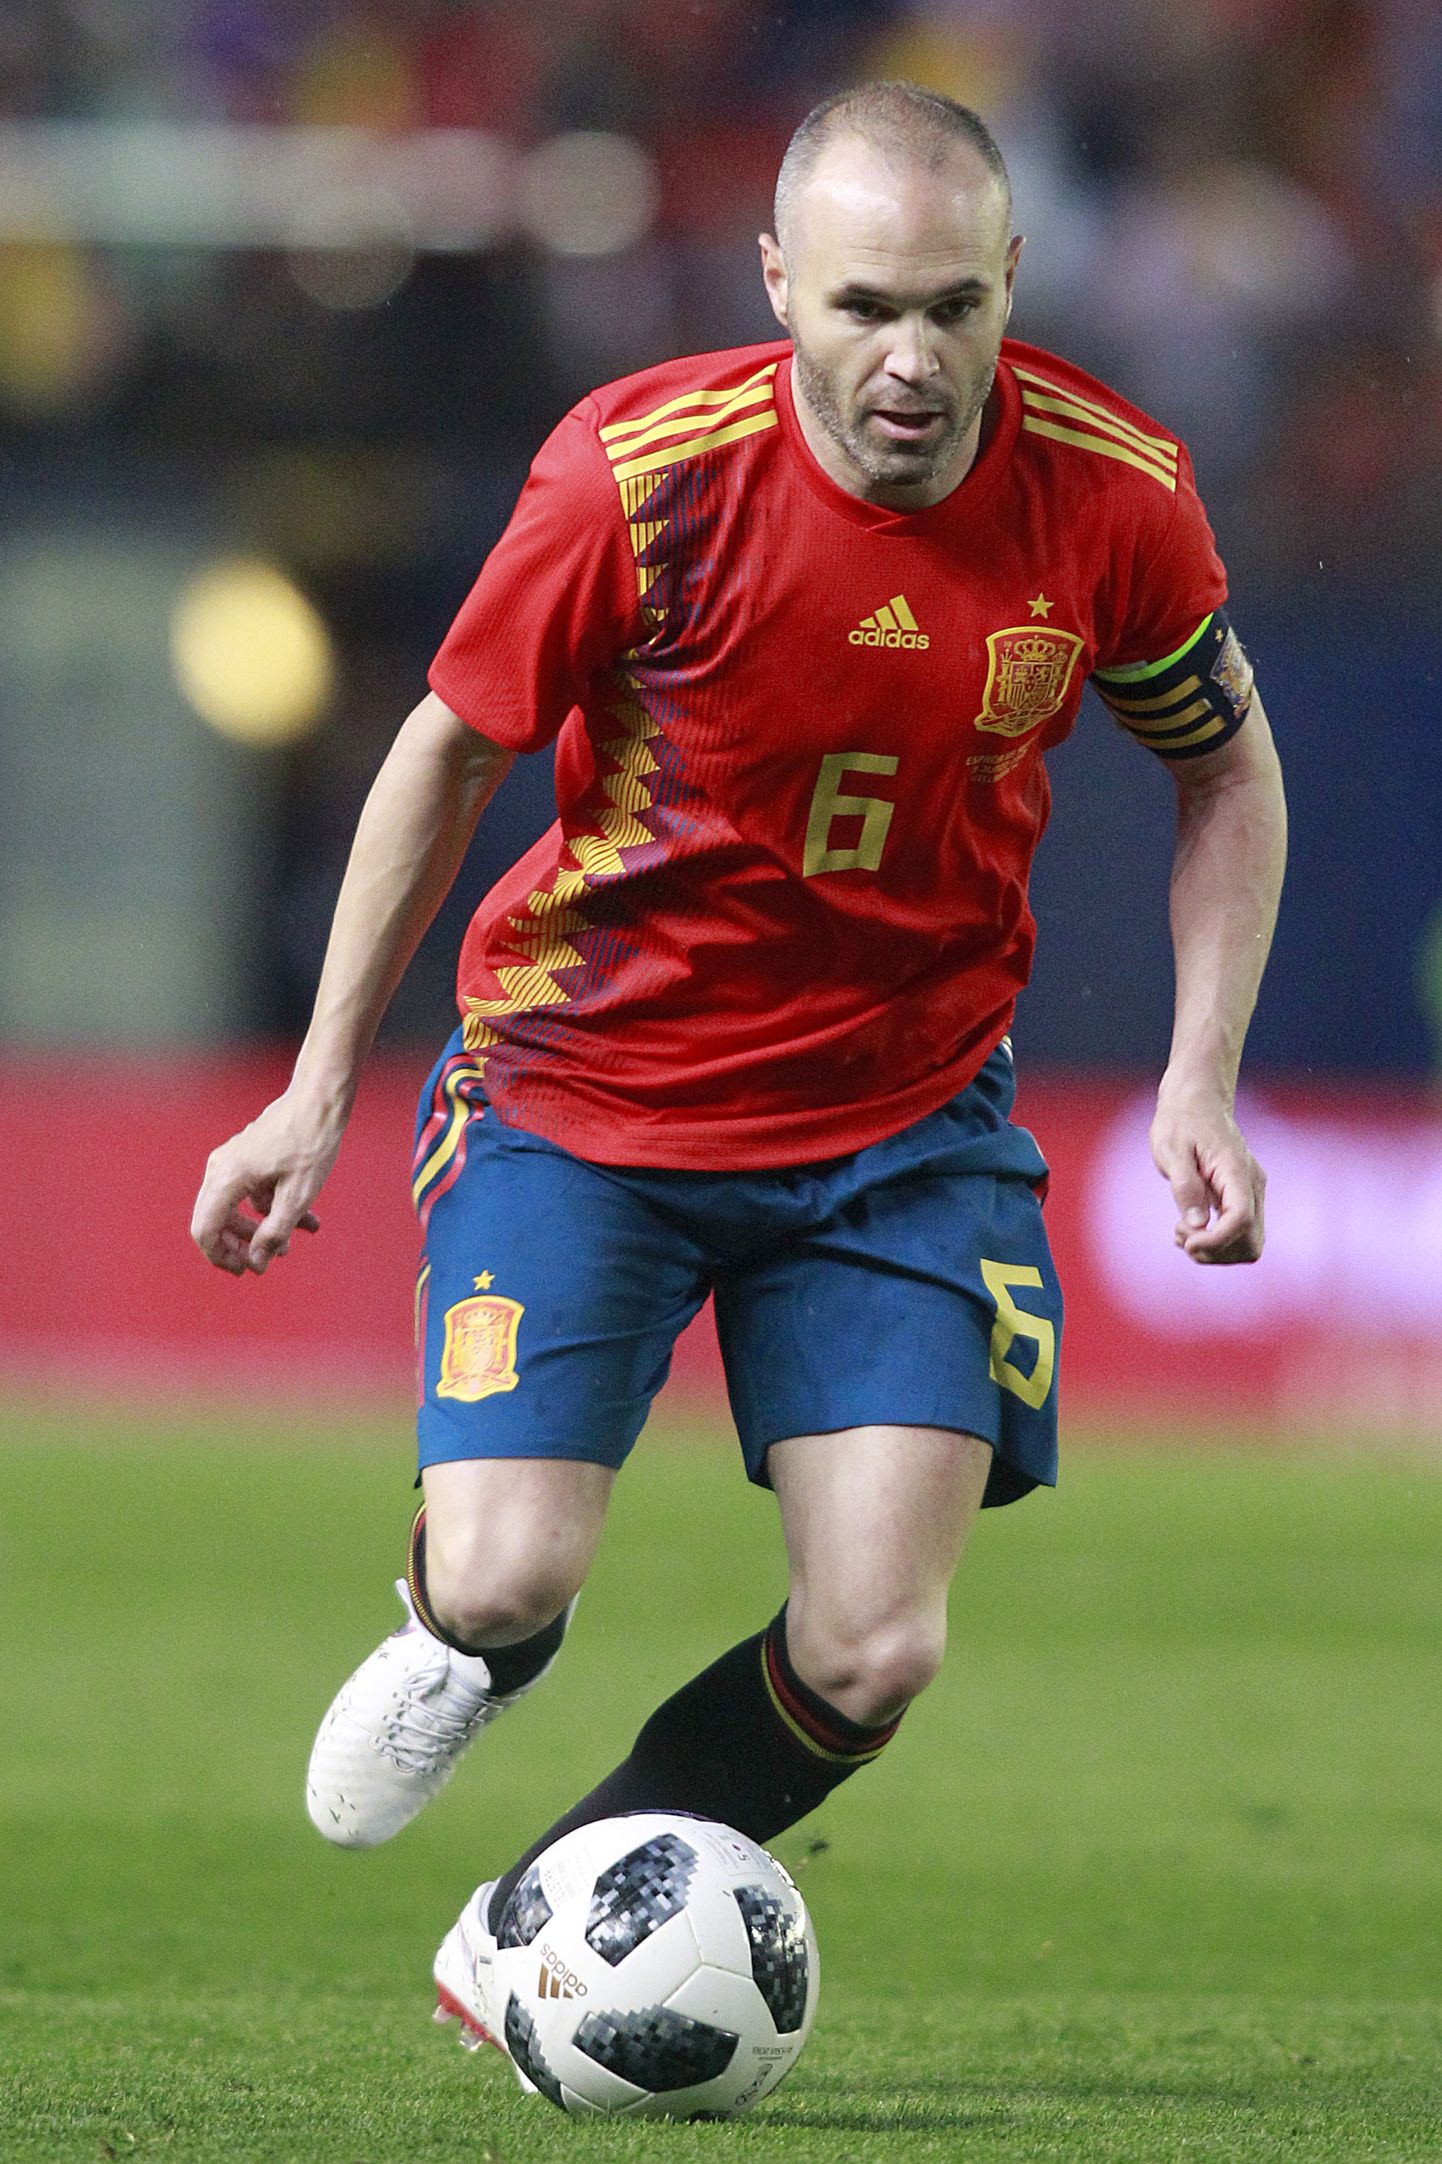 Spain's Andres Iniesta during international friendly match on June 3,2018.(Photo by Acero/Alter Photos/Sipa USA)